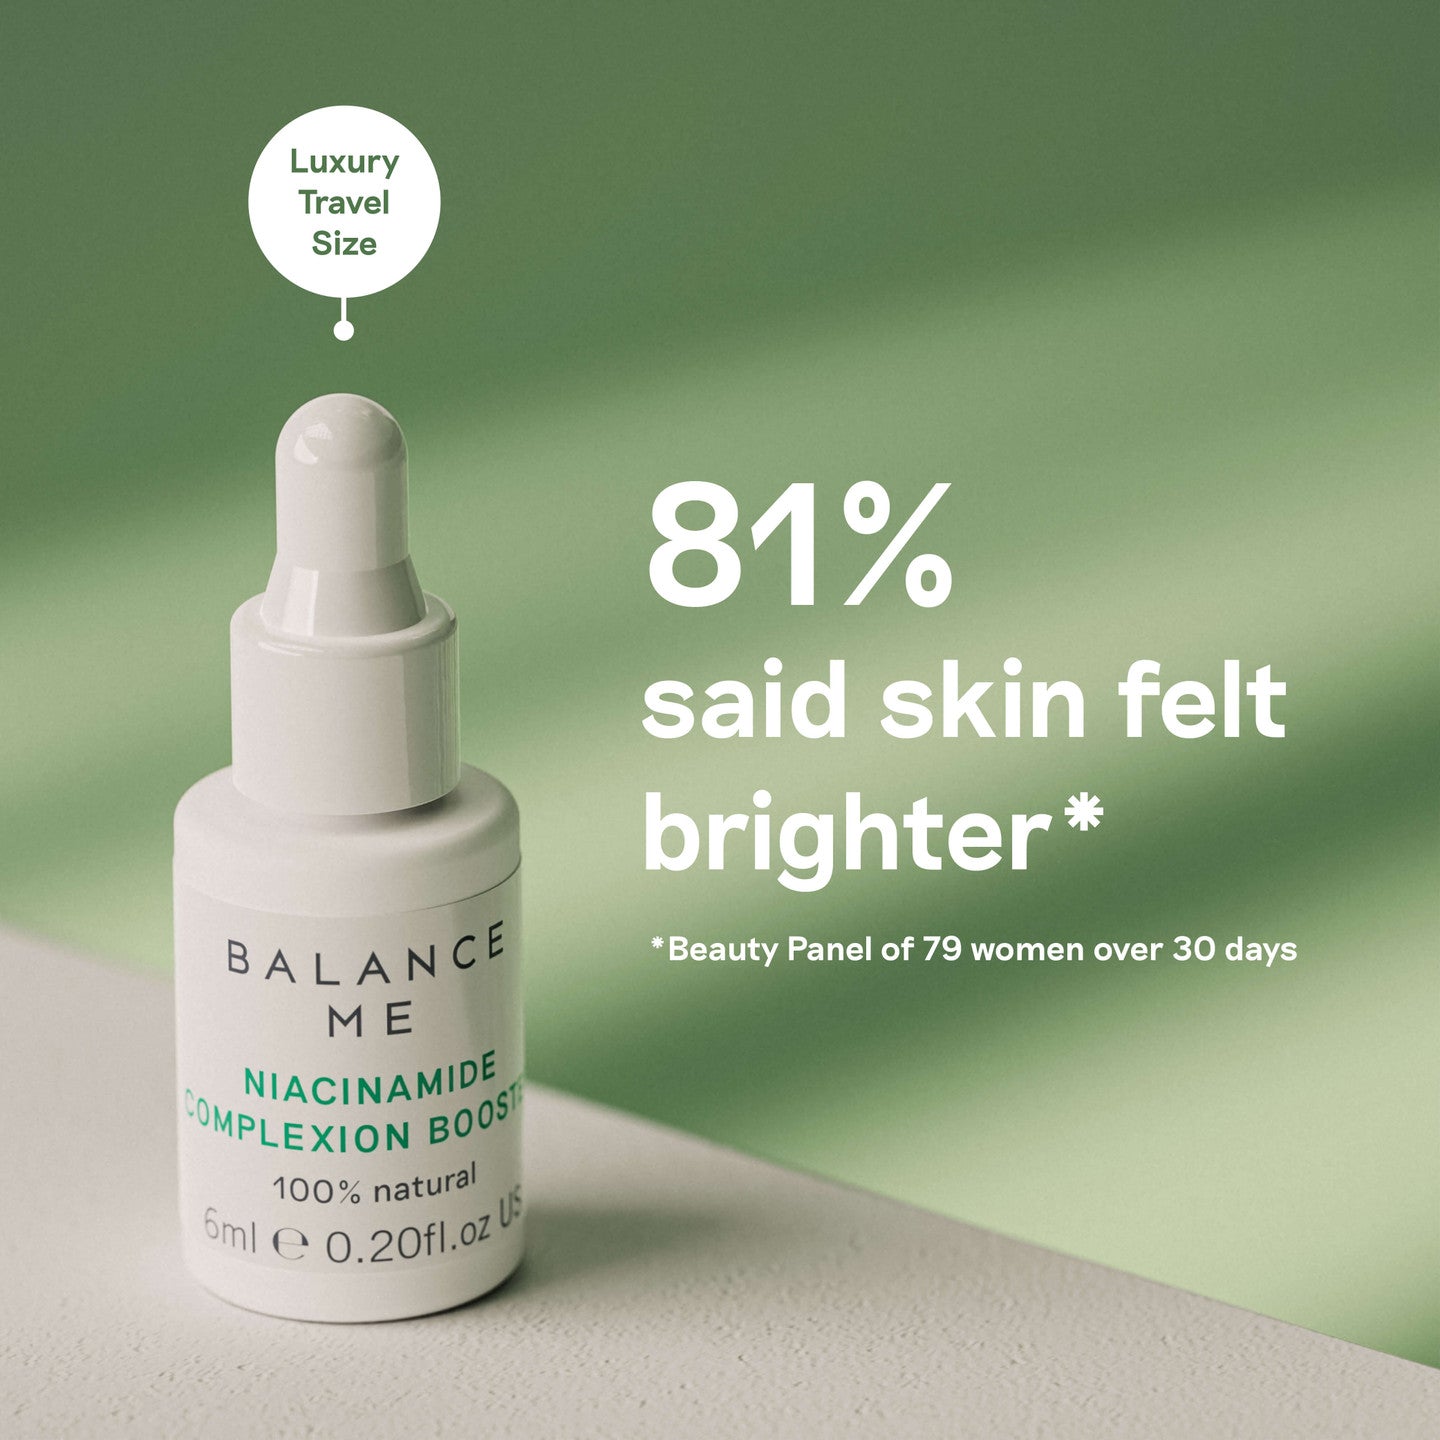 Niacinamide Complexion Booster 6ml